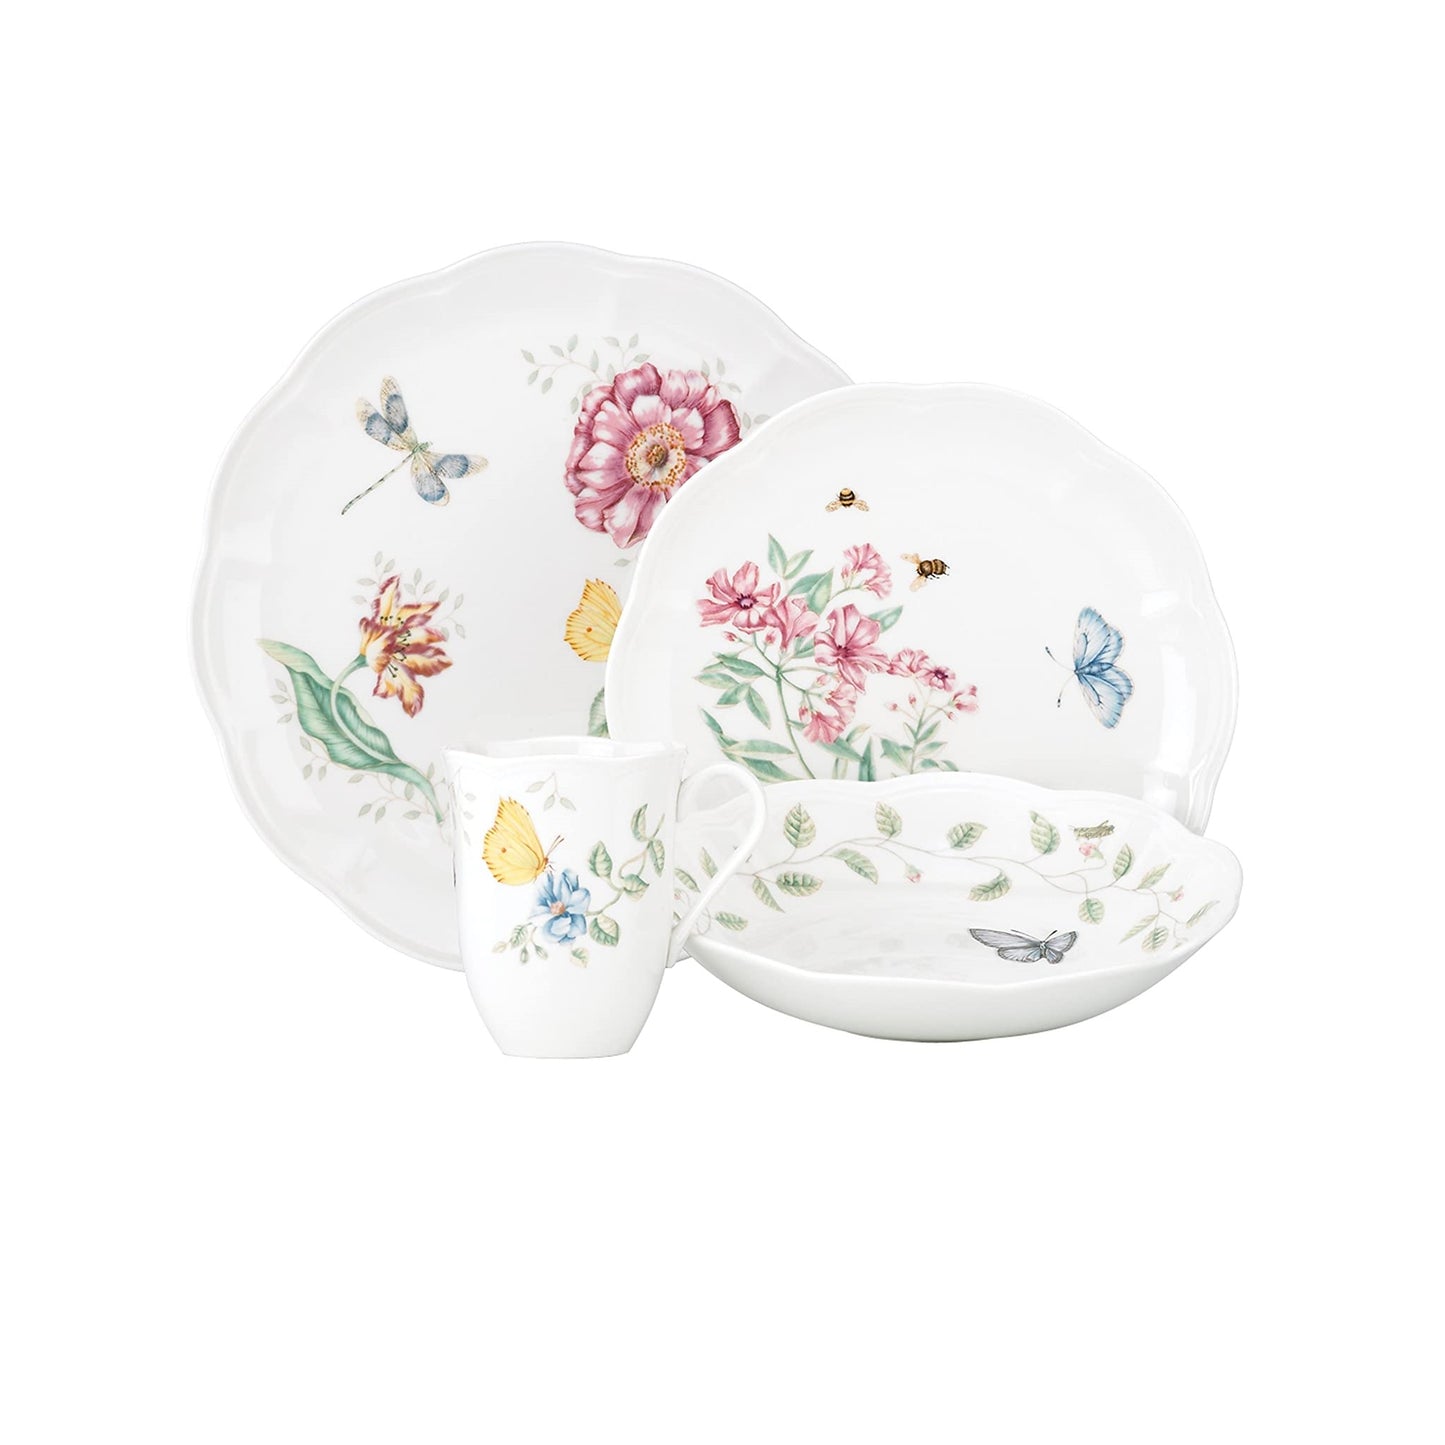 Butterfly Meadow 4-Piece Place Setting by Lenox